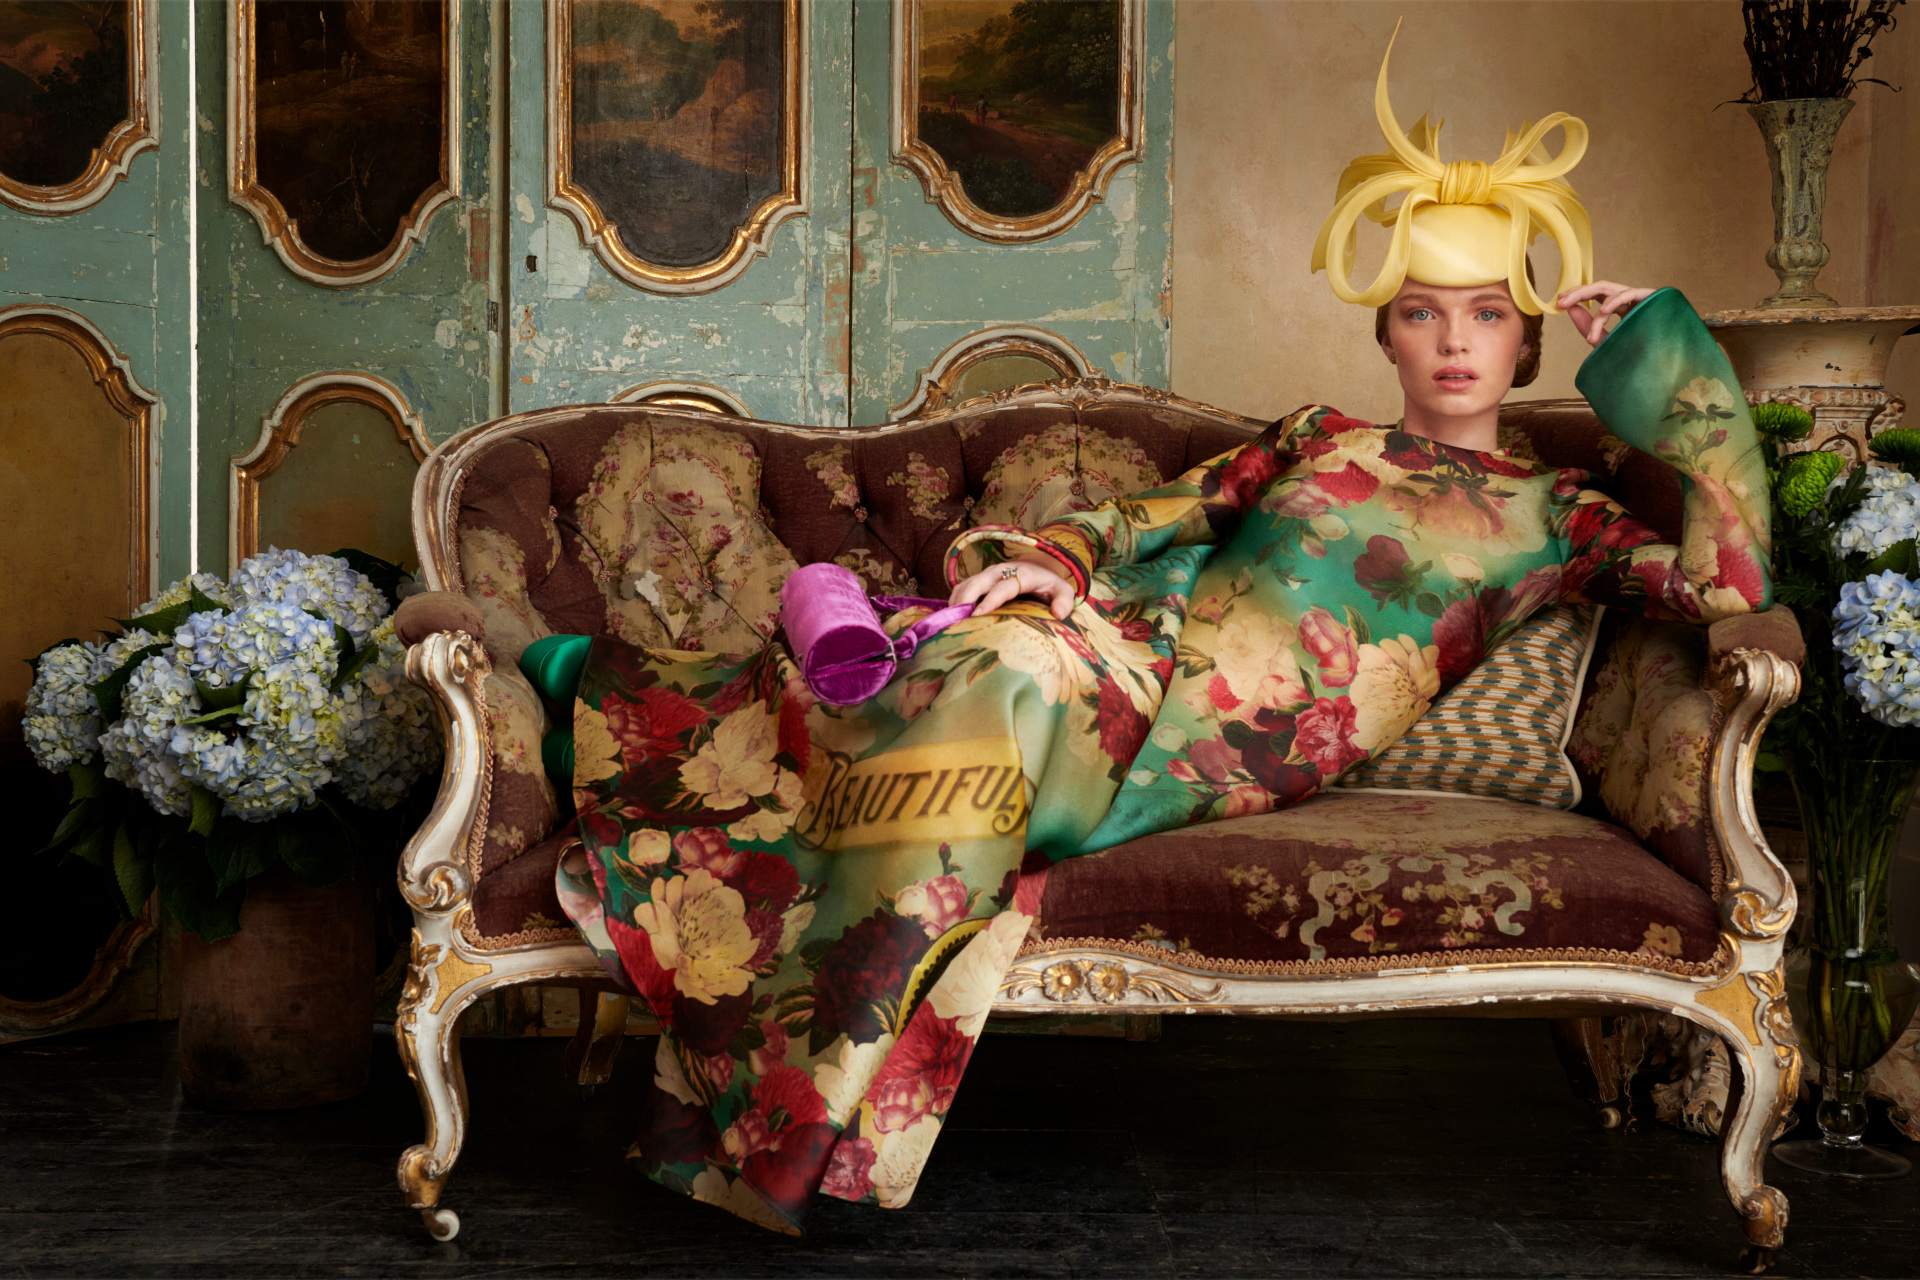 Woman in colourful dress and hart lounging on ornate sofa